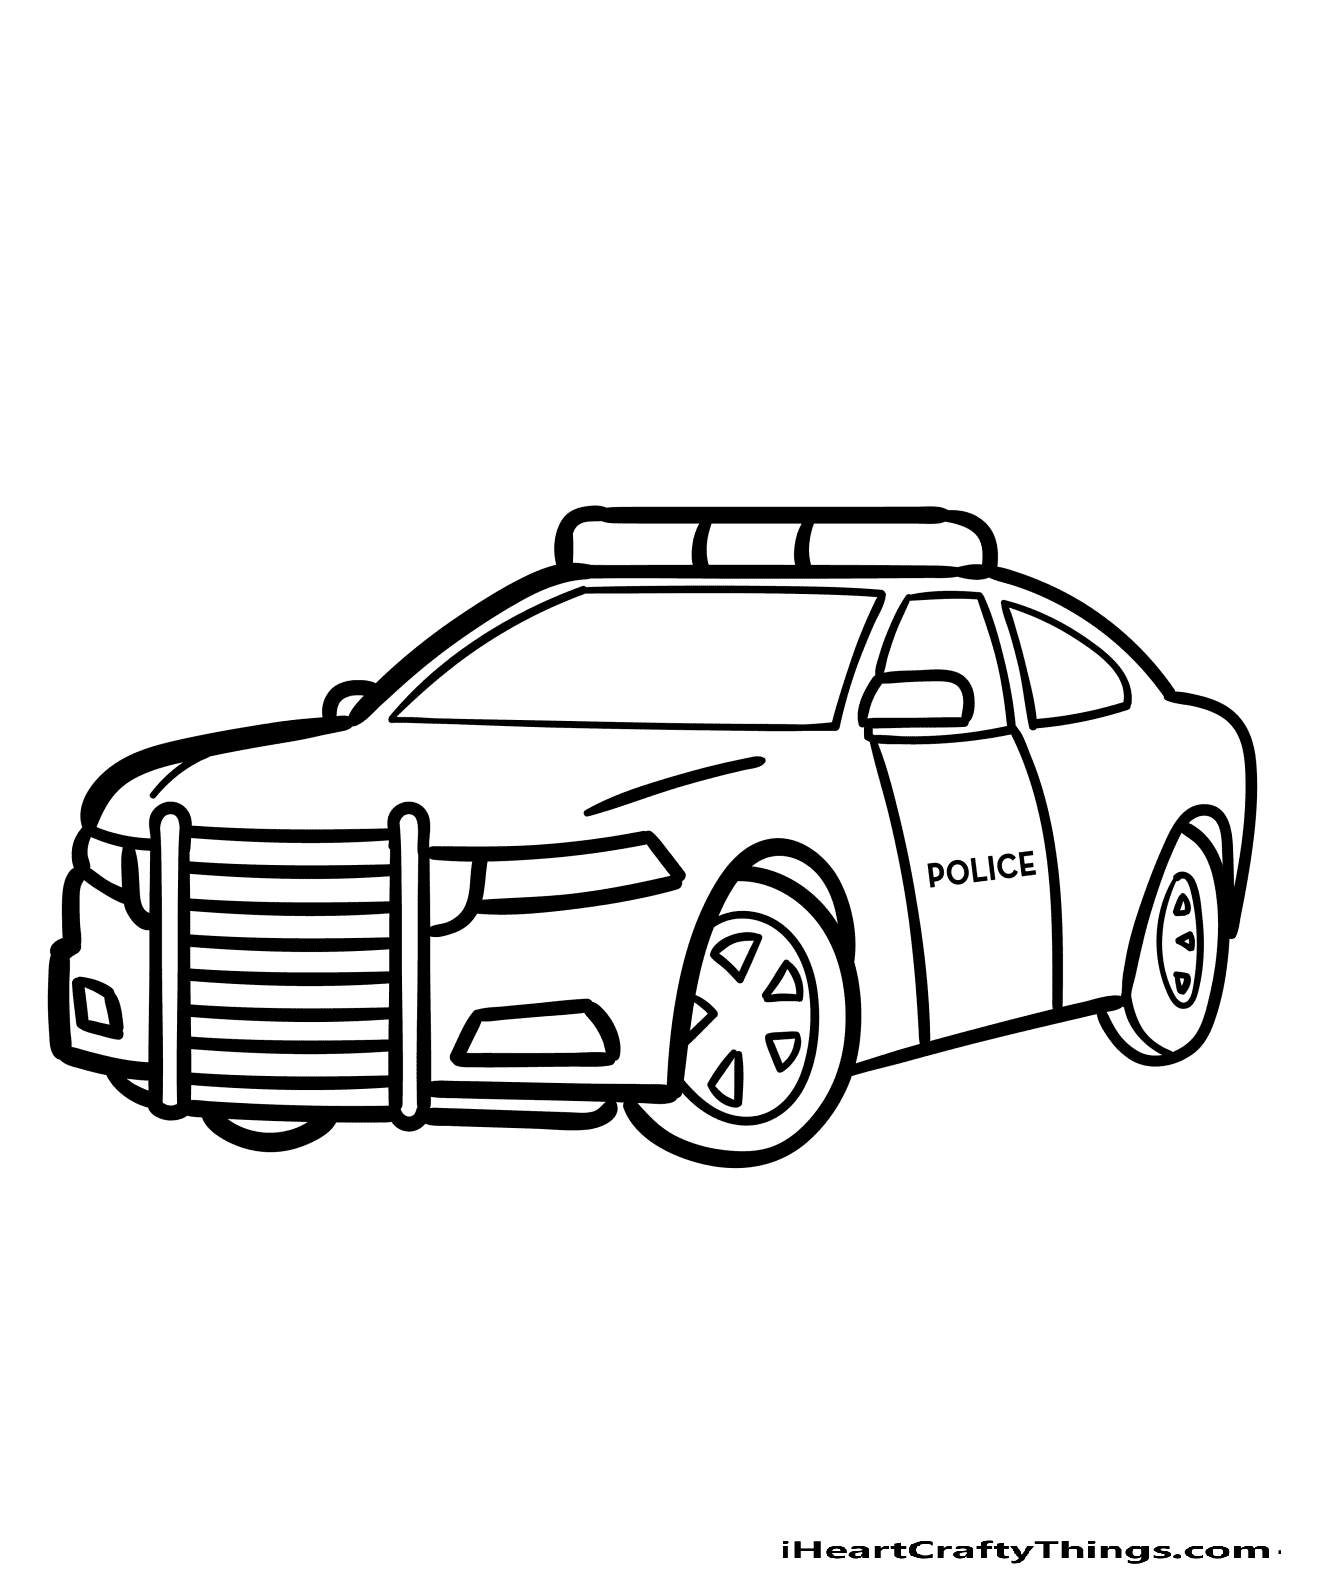 Dodge Charger Police Car Image